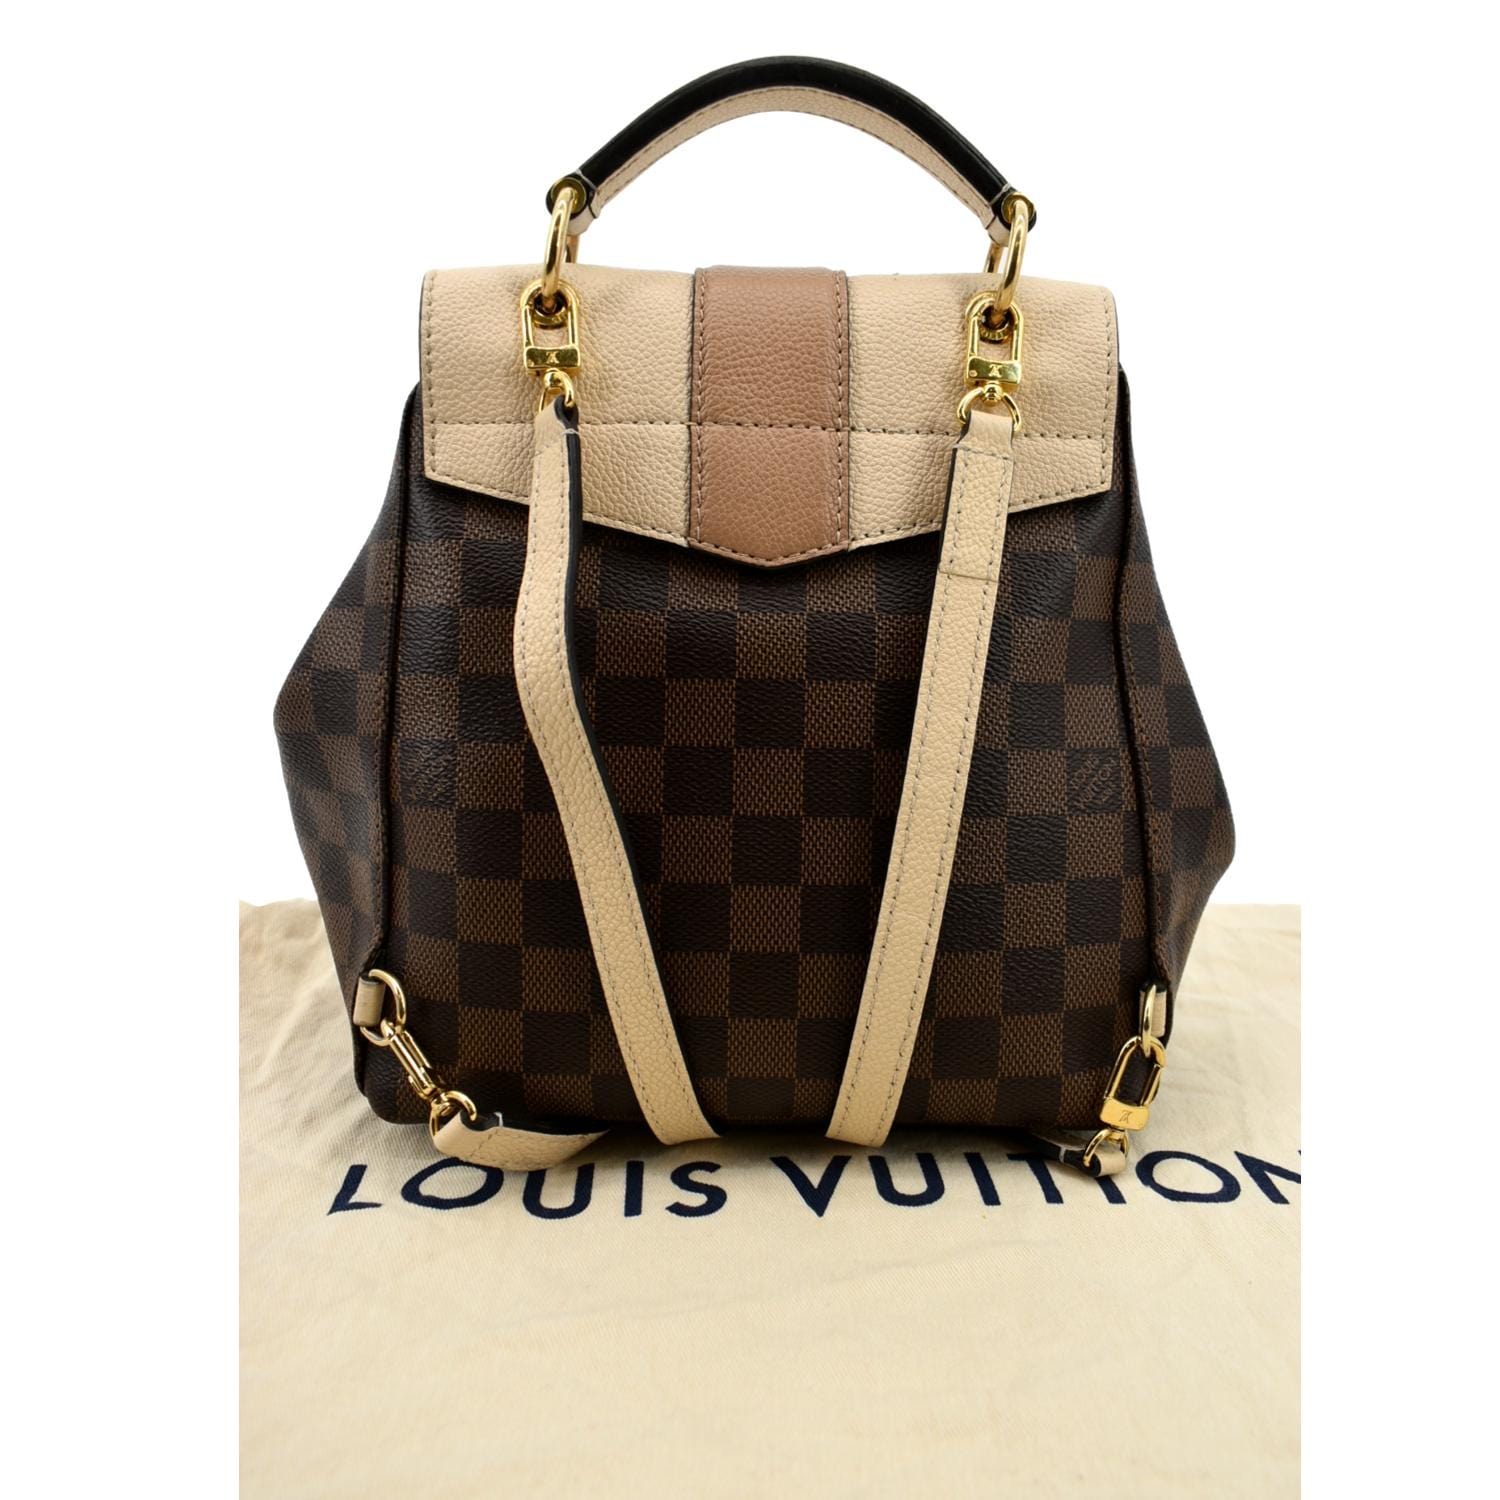 4 bags in 1! This Louis Vuitton Clapton can be worn as a backpack, cro